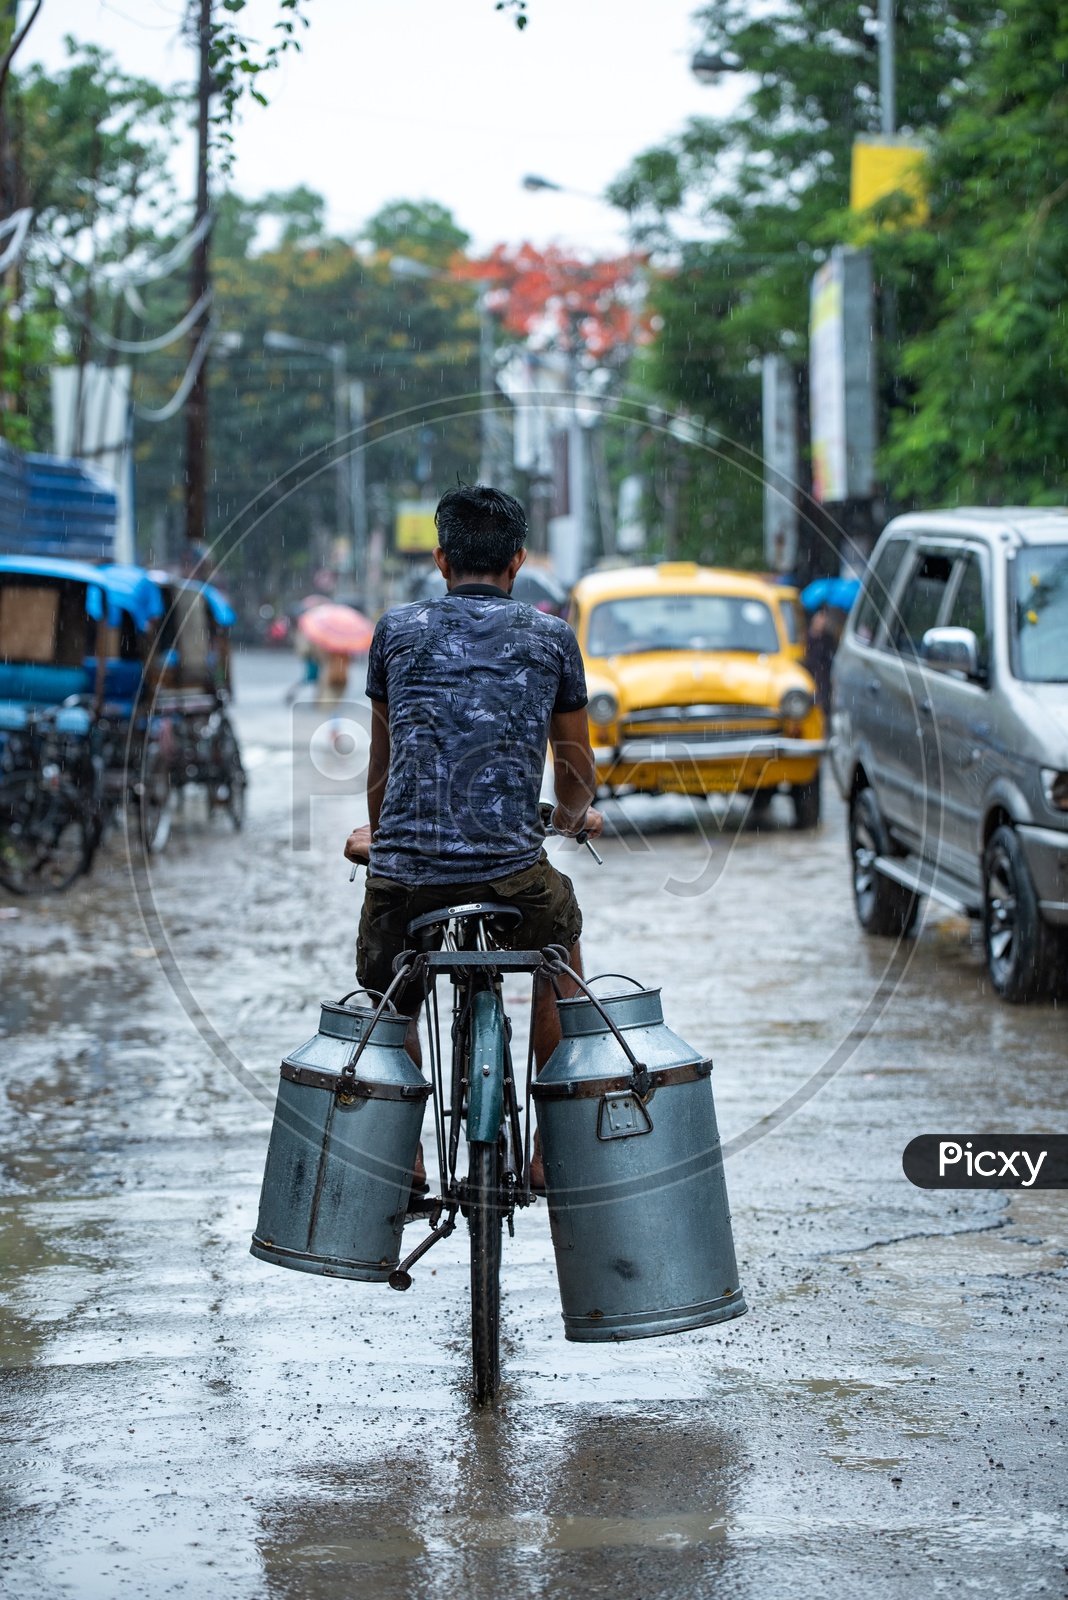 A Milk Boy Or Milk Supplier Carrying Milk Cans On Bicycle  Back  In Heavy Rain  in kolkata